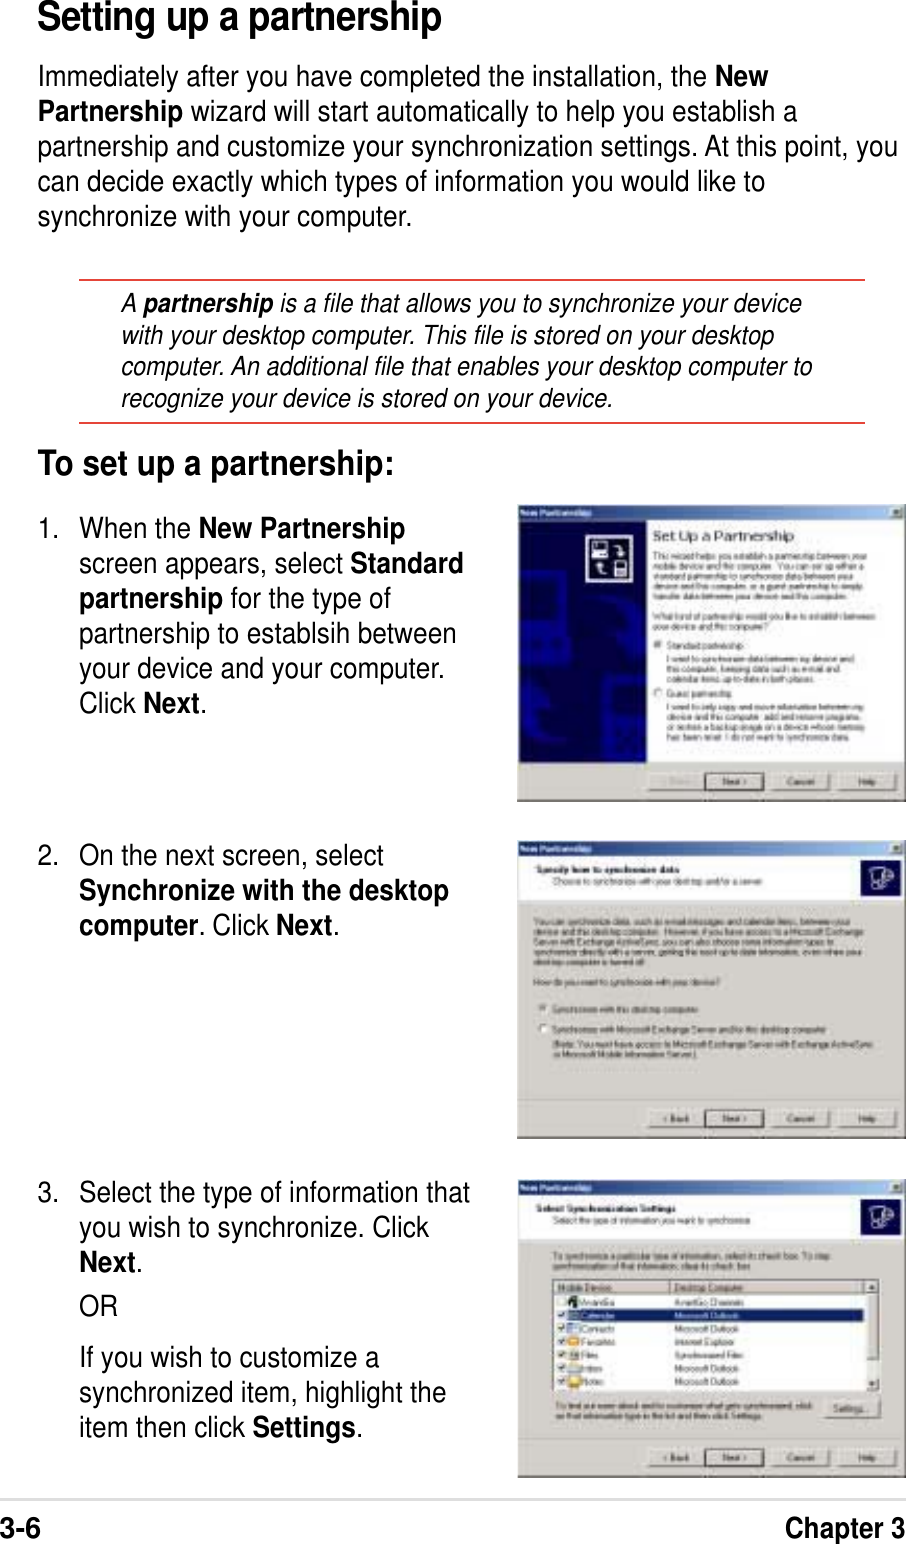 3-6Chapter 3Setting up a partnershipImmediately after you have completed the installation, the NewPartnership wizard will start automatically to help you establish apartnership and customize your synchronization settings. At this point, youcan decide exactly which types of information you would like tosynchronize with your computer.Apartnership is a file that allows you to synchronize your devicewith your desktop computer. This file is stored on your desktopcomputer. An additional file that enables your desktop computer torecognize your device is stored on your device.2. On the next screen, selectSynchronize with the desktopcomputer. Click Next.3. Select the type of information thatyou wish to synchronize. ClickNext.ORIf you wish to customize asynchronized item, highlight theitem then click Settings.To set up a partnership:1. When the New Partnershipscreen appears, select Standardpartnership for the type ofpartnership to establsih betweenyour device and your computer.Click Next.